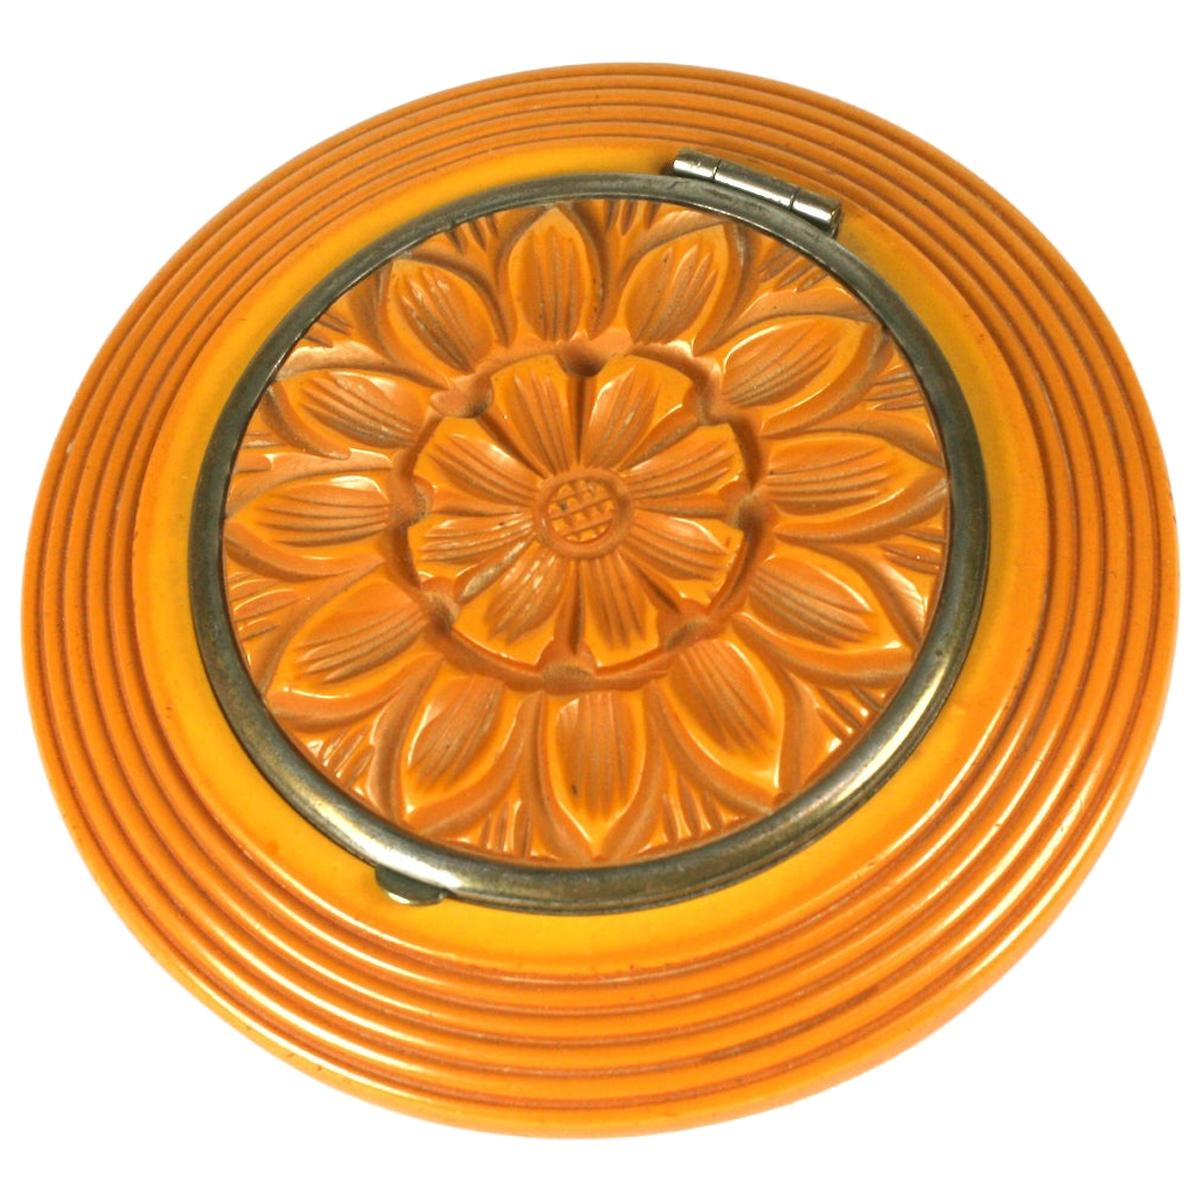 Carved Bakelite Art Deco Compact For Sale